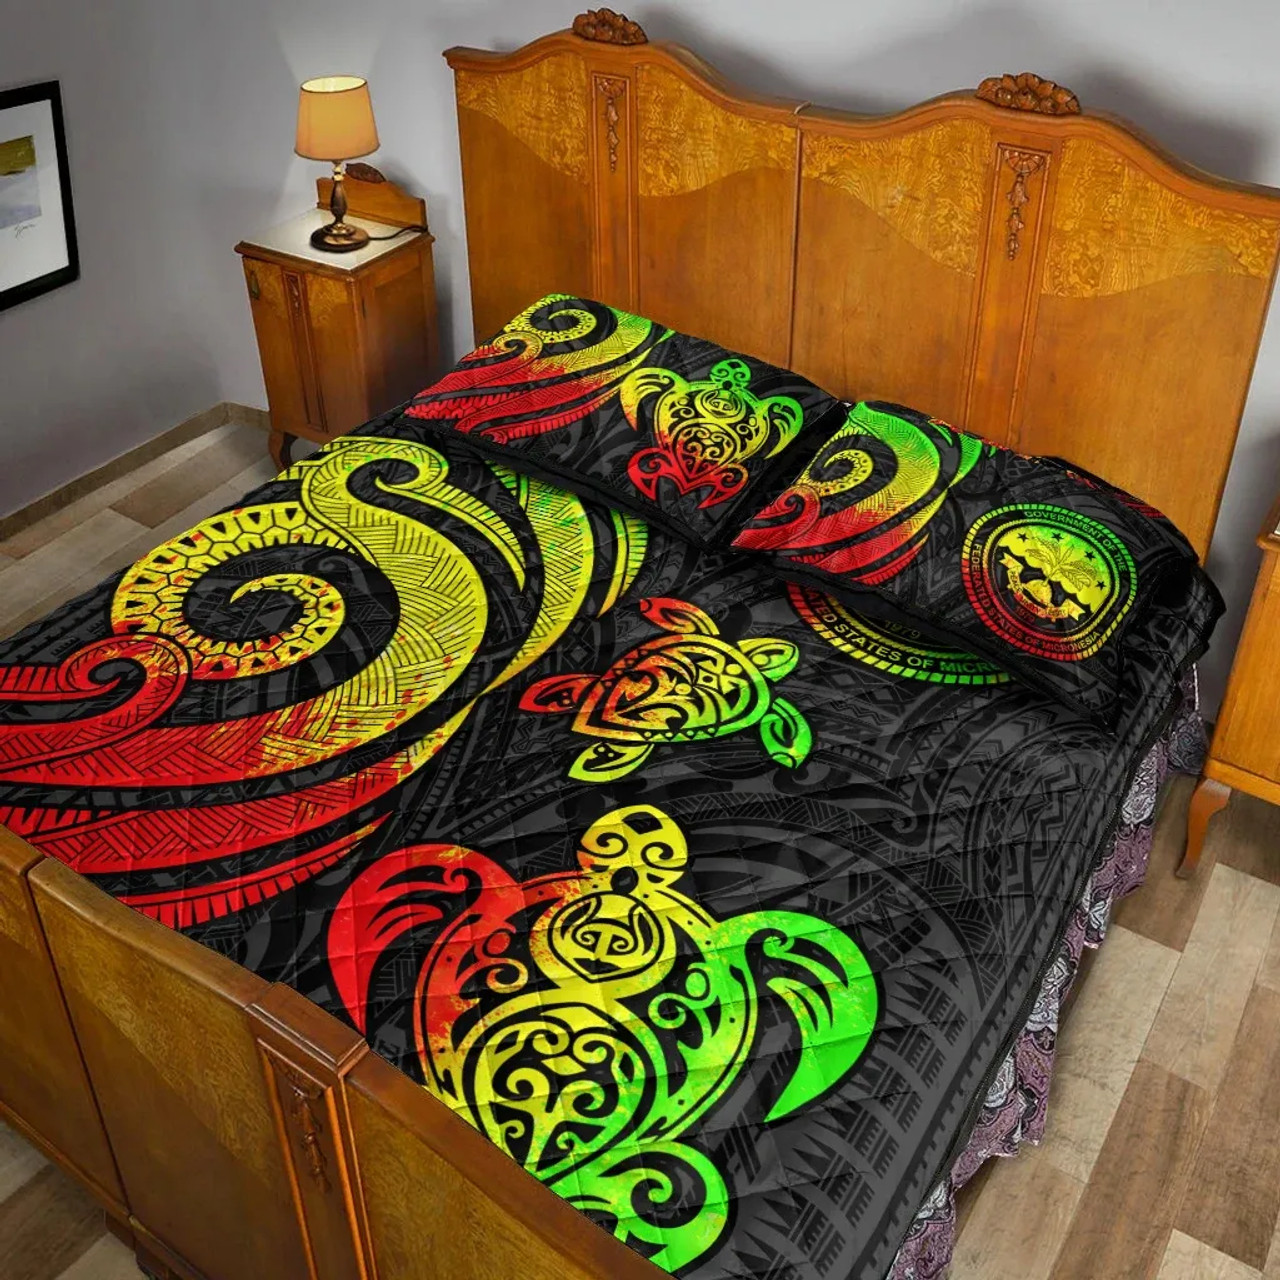 Federated States of Micronesia Quilt Bed Set - Reggae Tentacle Turtle 4